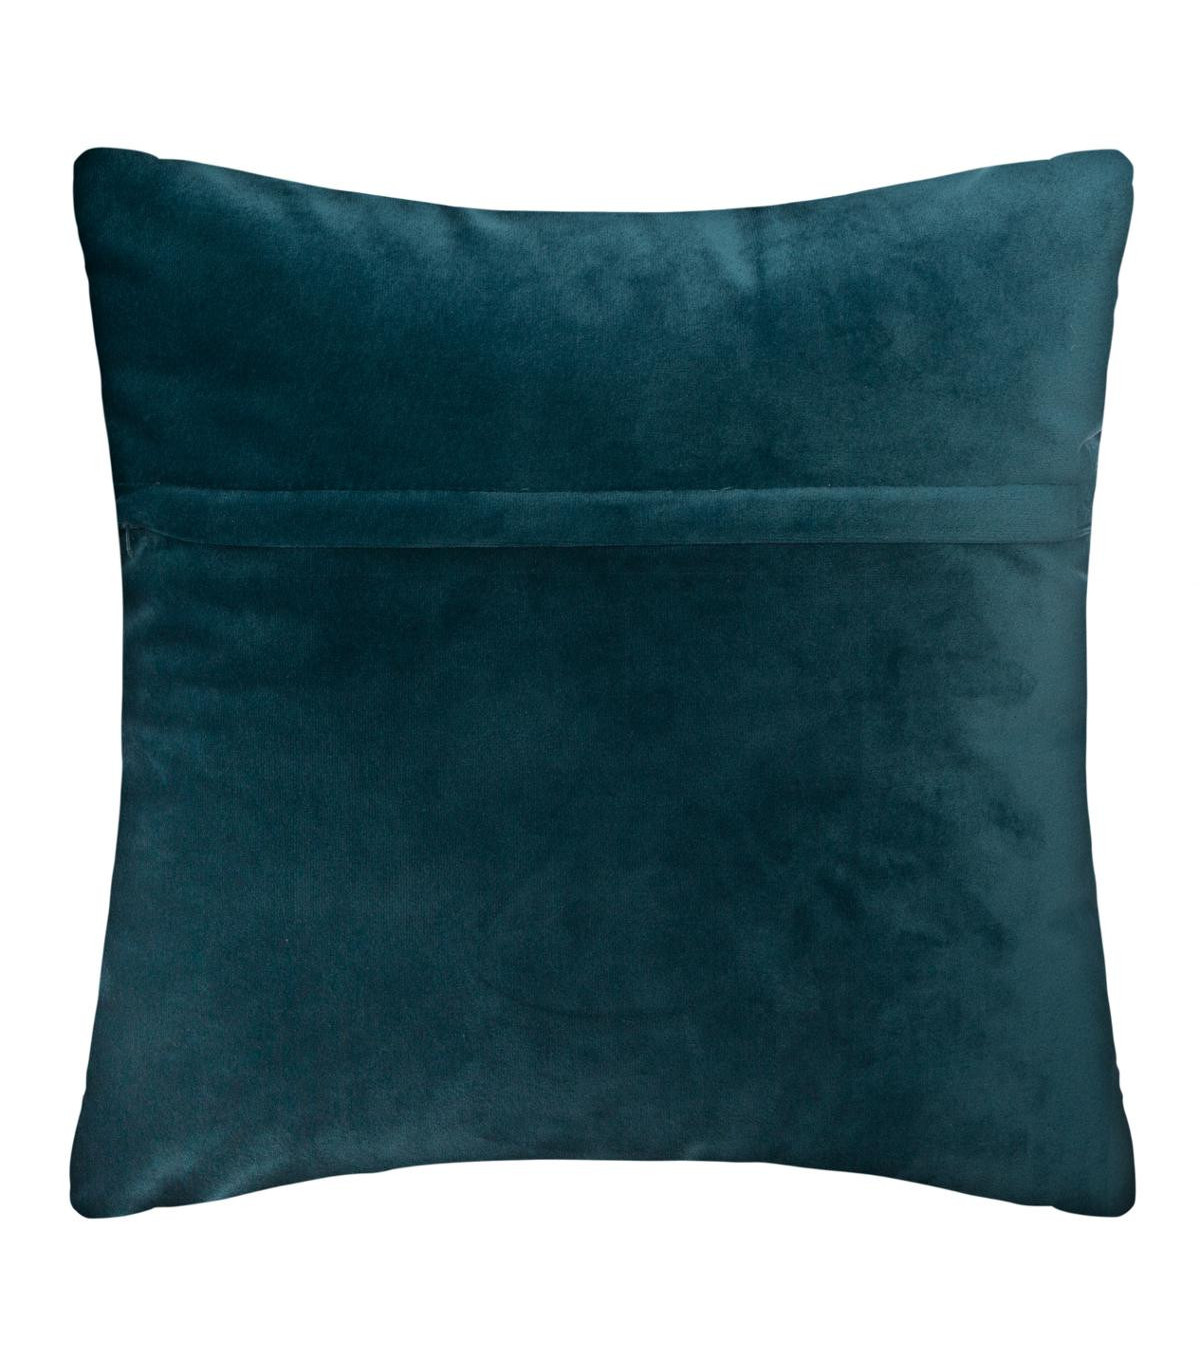 coussin-vel-emb-dolce-ca-40x40 (1)